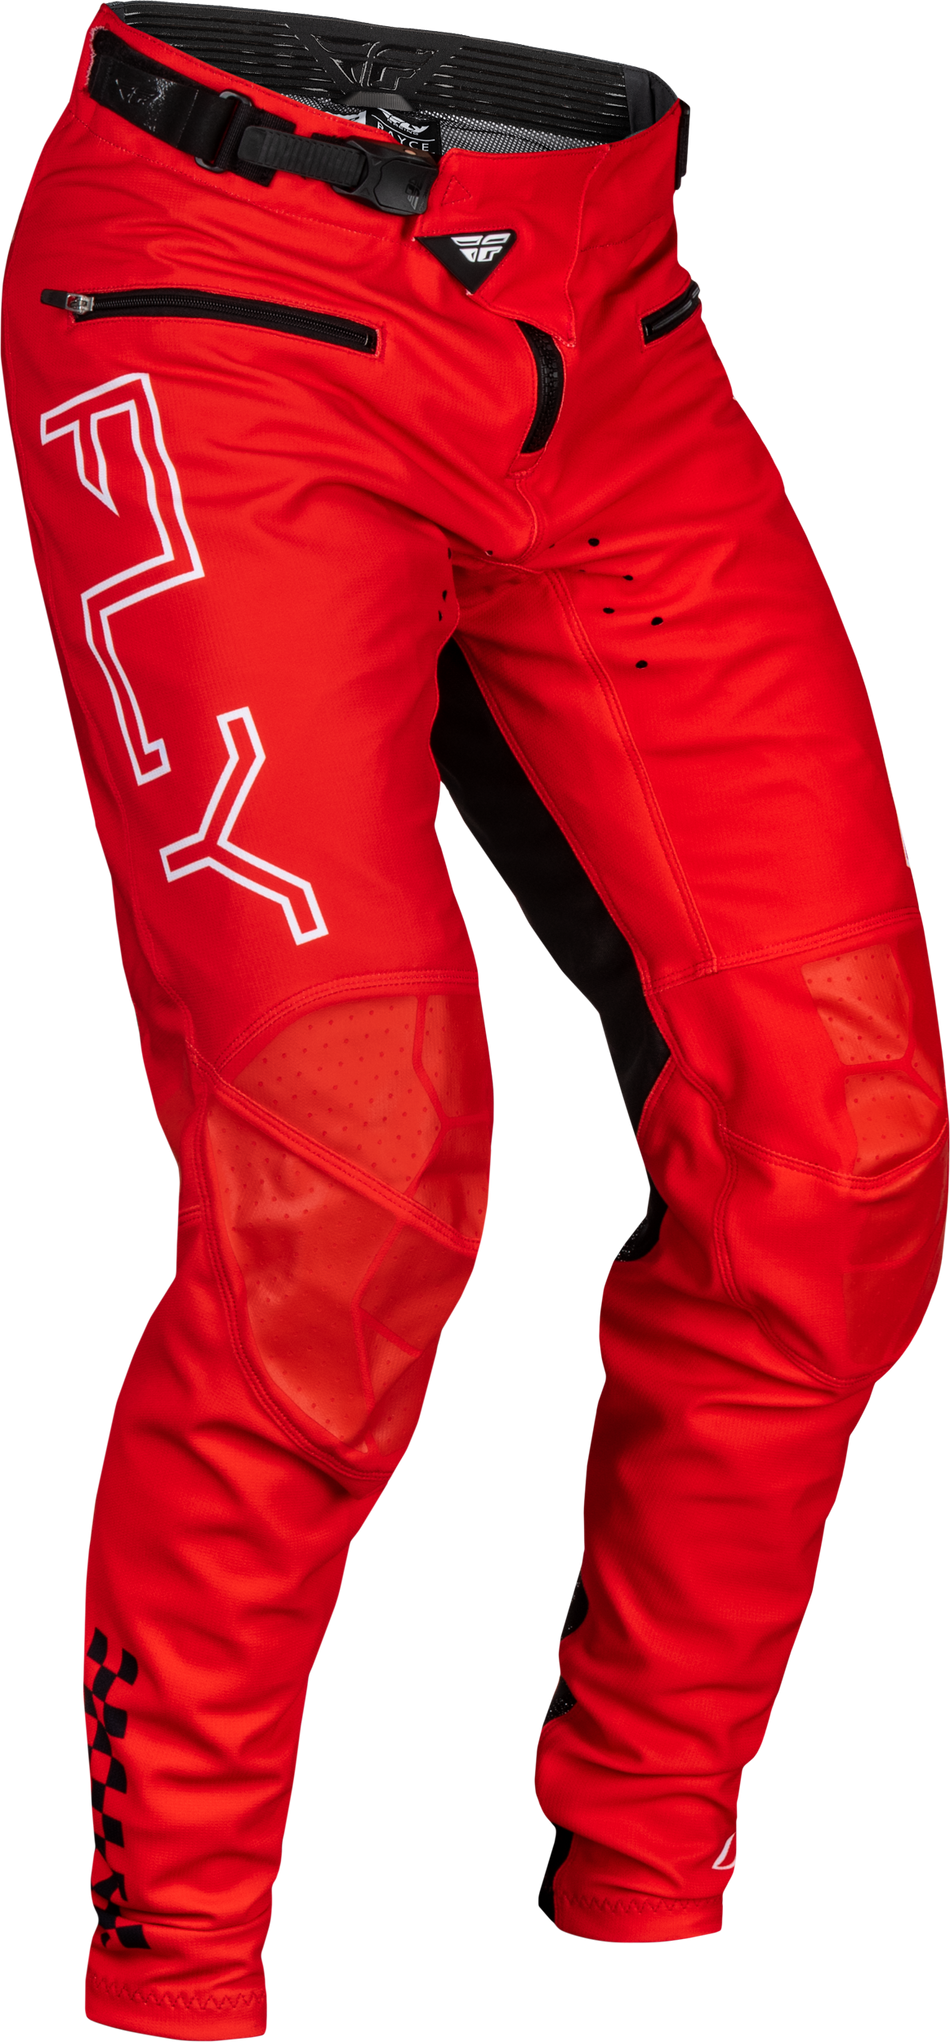 FLY RACING Youth Rayce Bicycle Pants Red Sz 24 377-06324